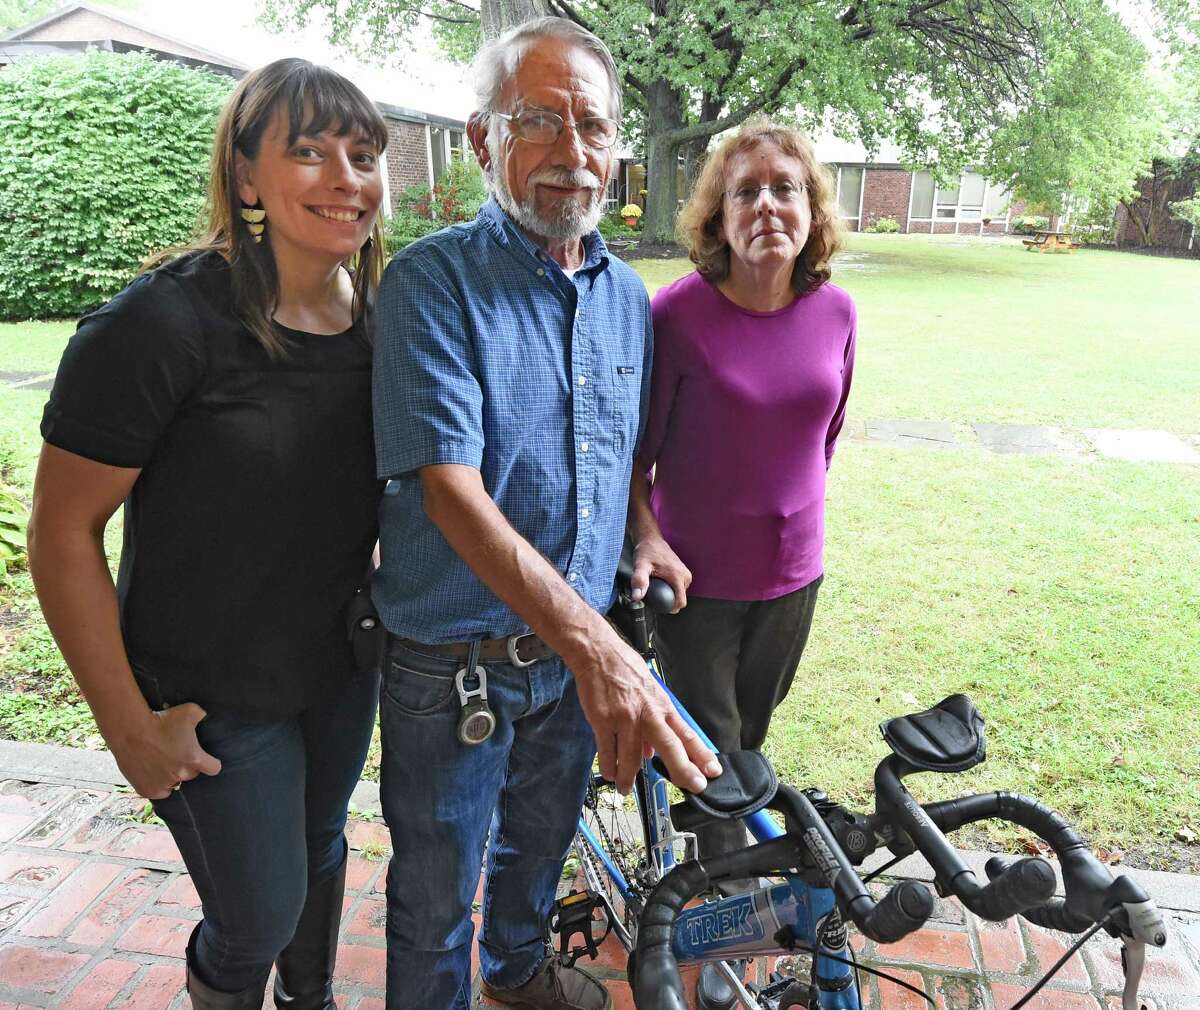 The Strope family, Sara, left, Harold and Miriam stand near Harold's bike at the Albany Academy for Girls Sept. 30, 2015 in Albany, N.Y. On Thursday, October 1st, Sara Strope and her father will embark on a four-day, 200-mile bike ride, departing from Delmar. In 1995, during Sara's senior year at Albany Academy for Girls, her father had lifesaving surgery at Mass General in Boston - a heart transplant. Now they are embarking on this ride together celebrate the 20th anniversary of his transplant. They will be biking the route that Harold Strope took 20 years ago to receive his heart. They will be gathering at 9:00am Thursday at the Seville Bike Shop in Delmar to leave at 9:30. At least a dozen community members will be gathering to send them off. (Skip Dickstein/Times Union)